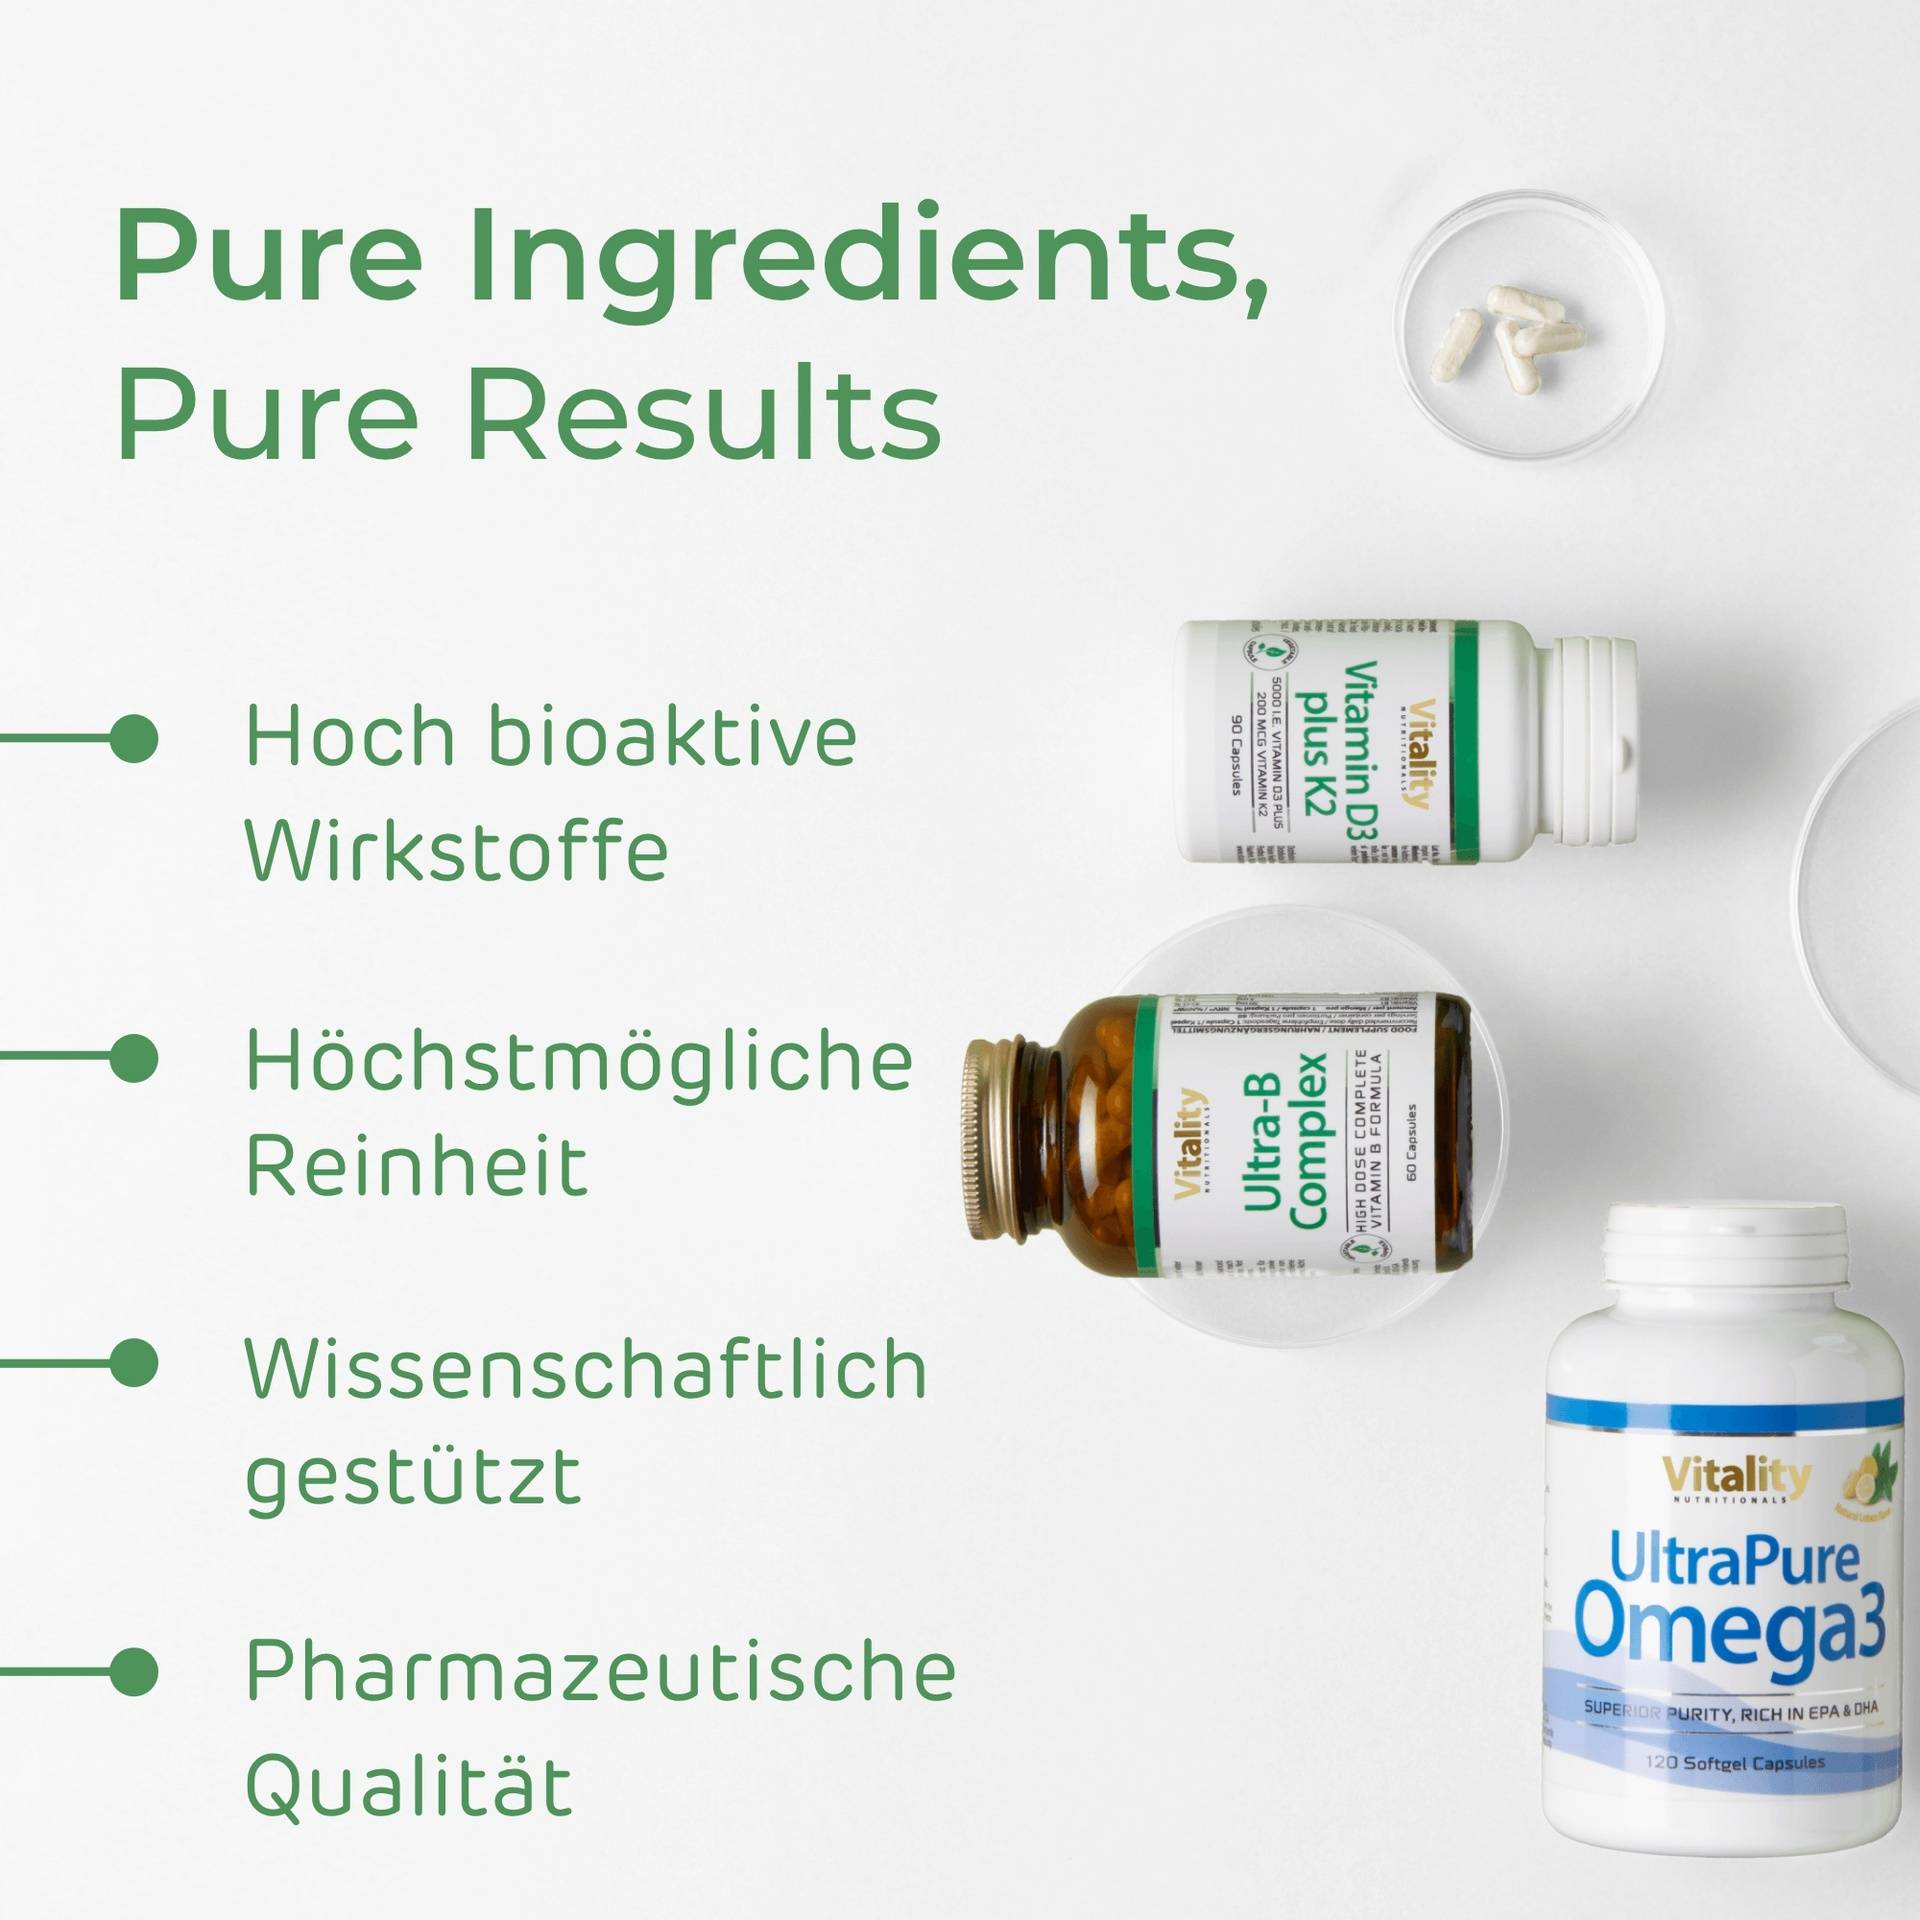 2000x2000_Pure Ingredients,Pure Results_clean_DE (2).png